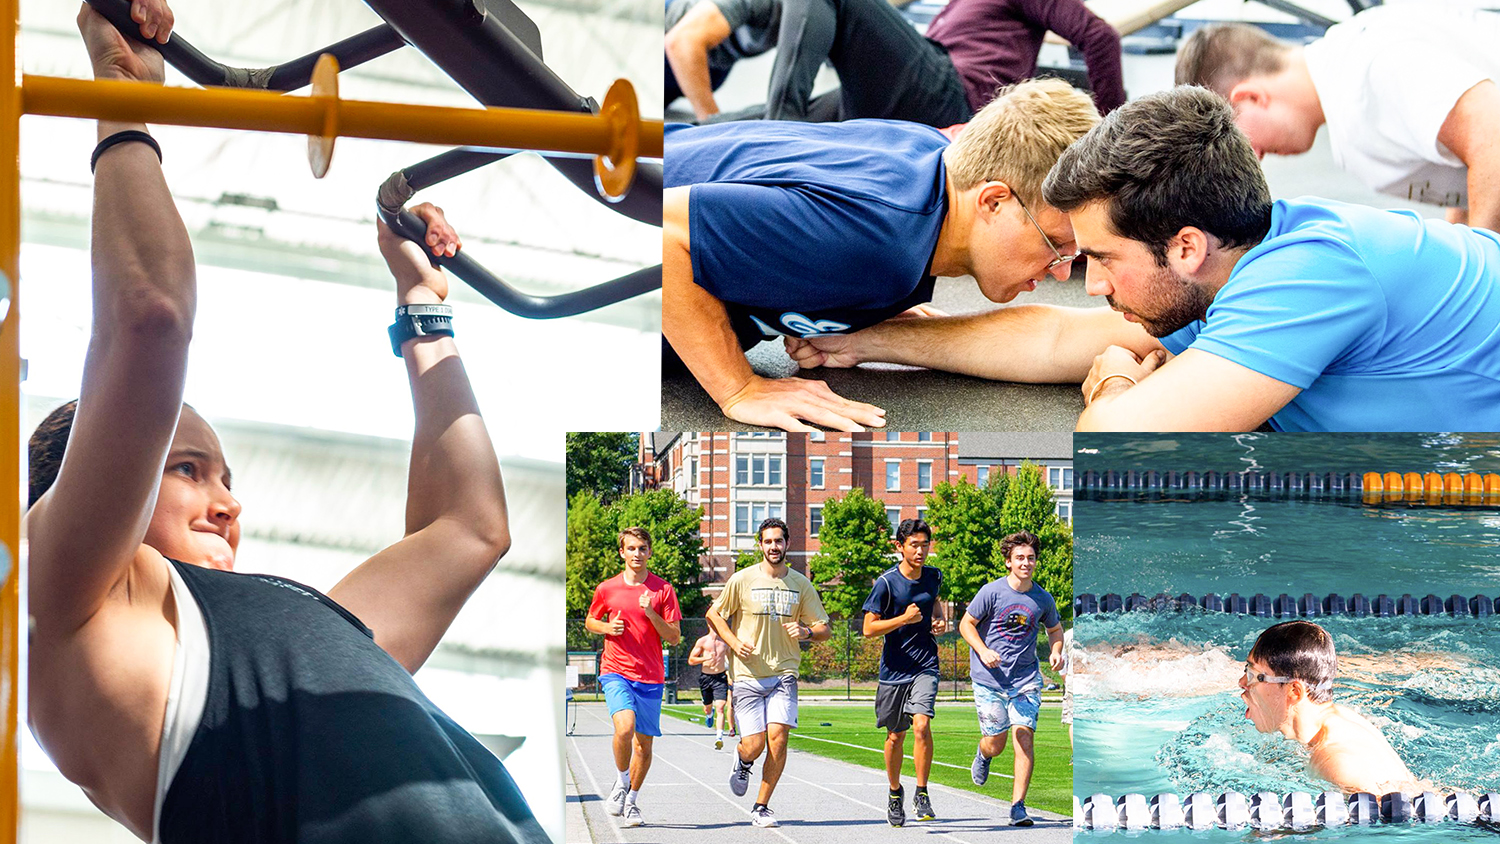 Collage of images: a woman doing pull-ups, a man doing push-ups, a group running, and a man swimming.